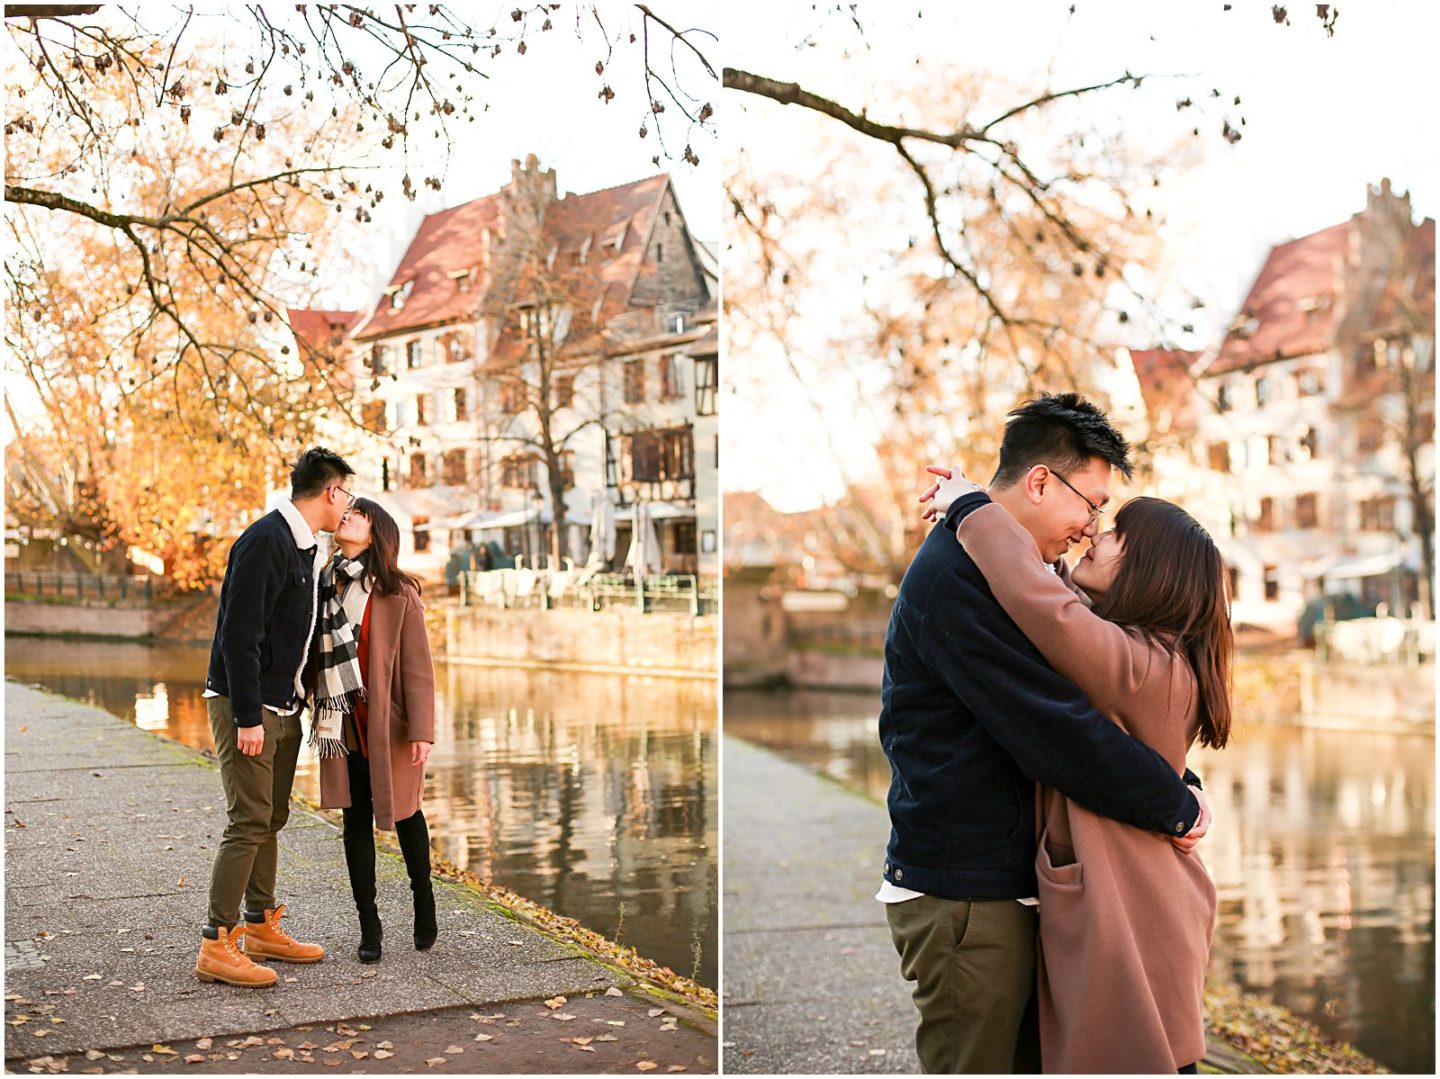 couple embraces after engagement in Petite France Strasbourg